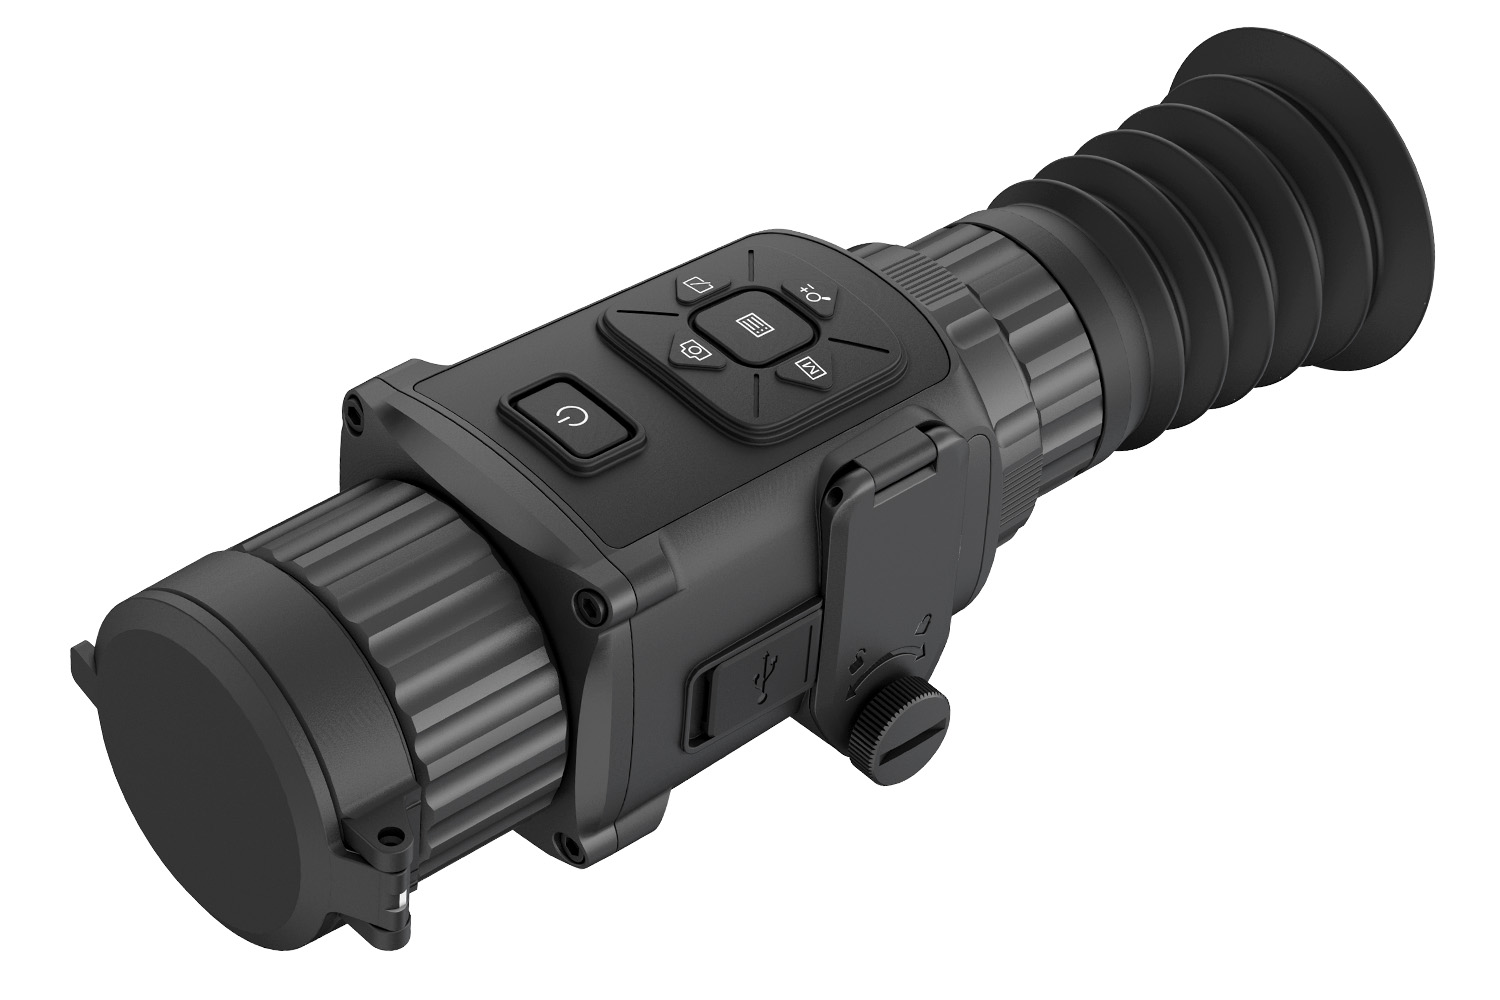 AGM RATTLER TS25-384 THERMAL SCOPE